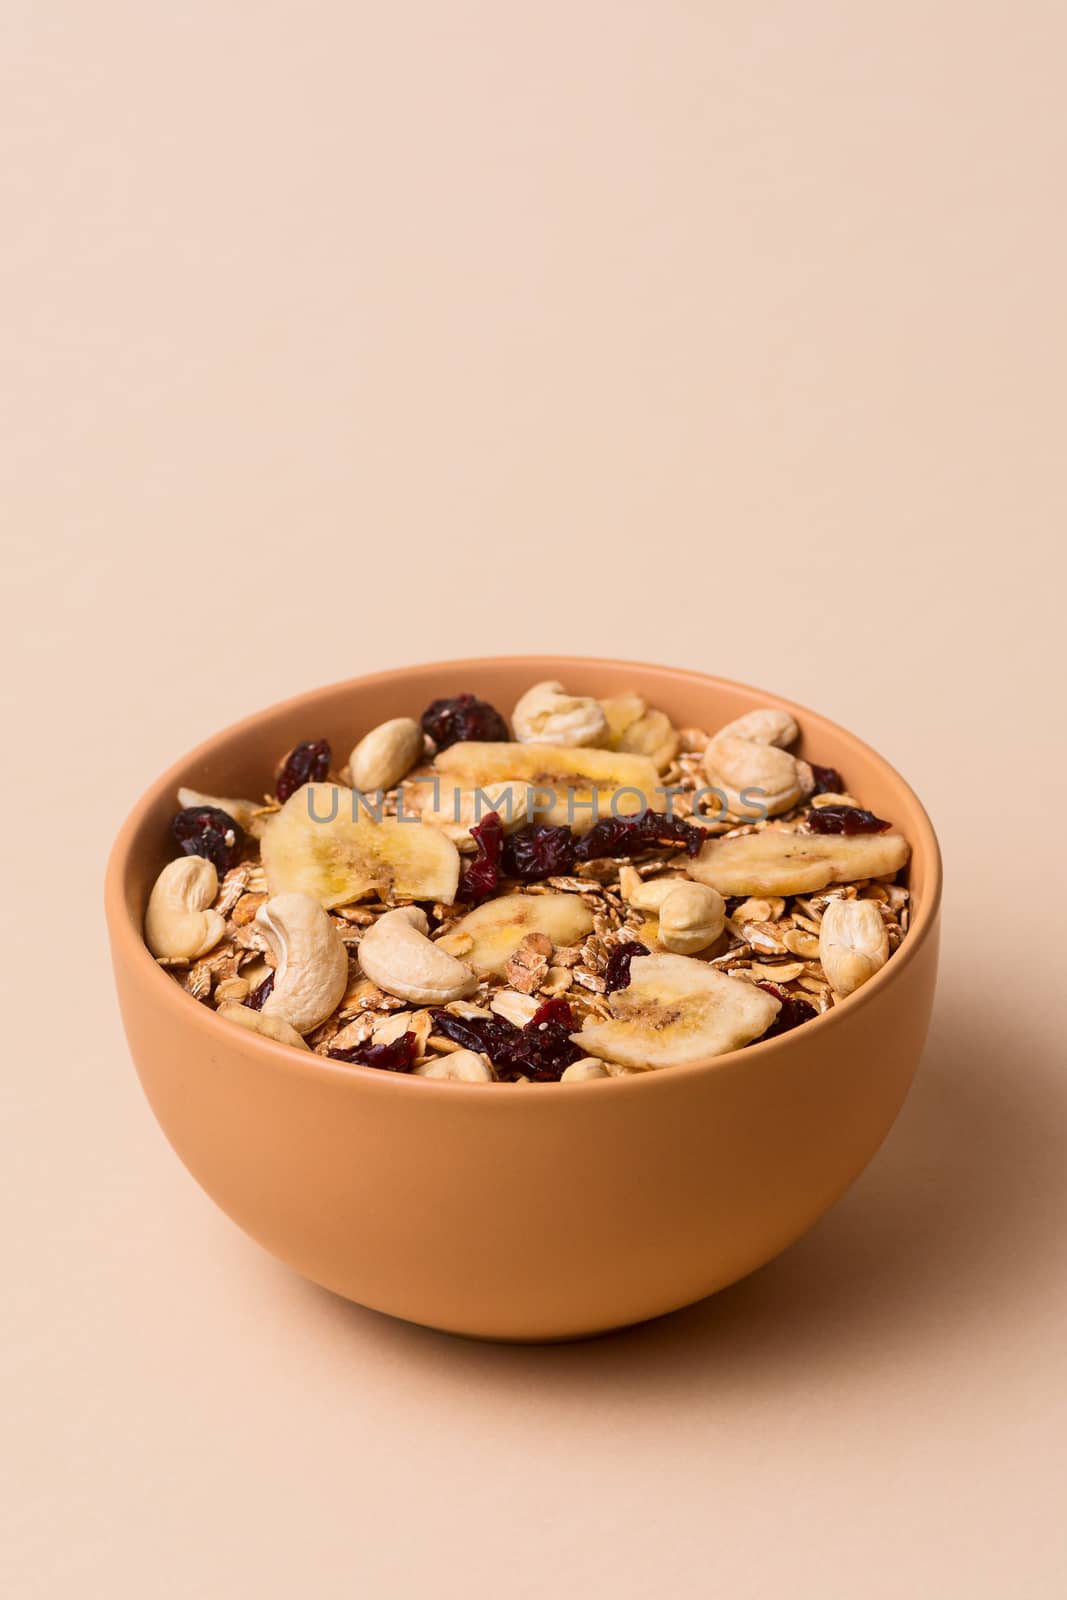 A fresh granola with dried and candied nuts and fruits in beige  by alexsdriver